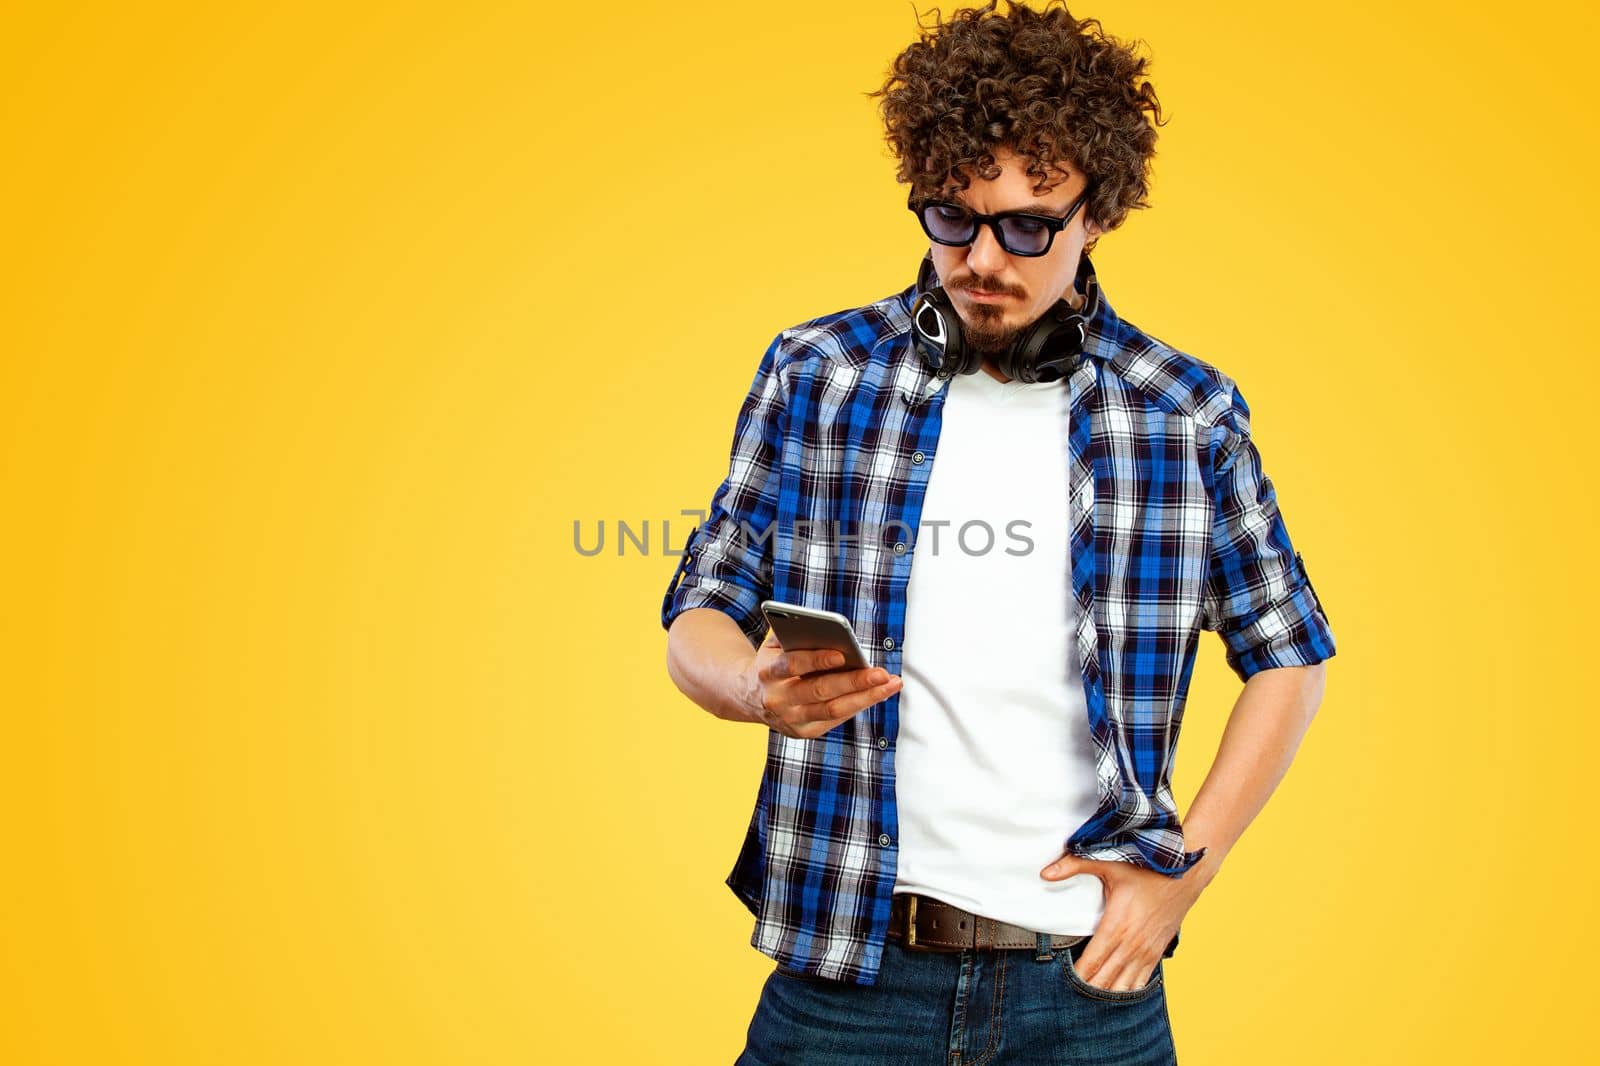 Handsome stylish man in hipster plaid shirt and sunglasses posing over yellow background